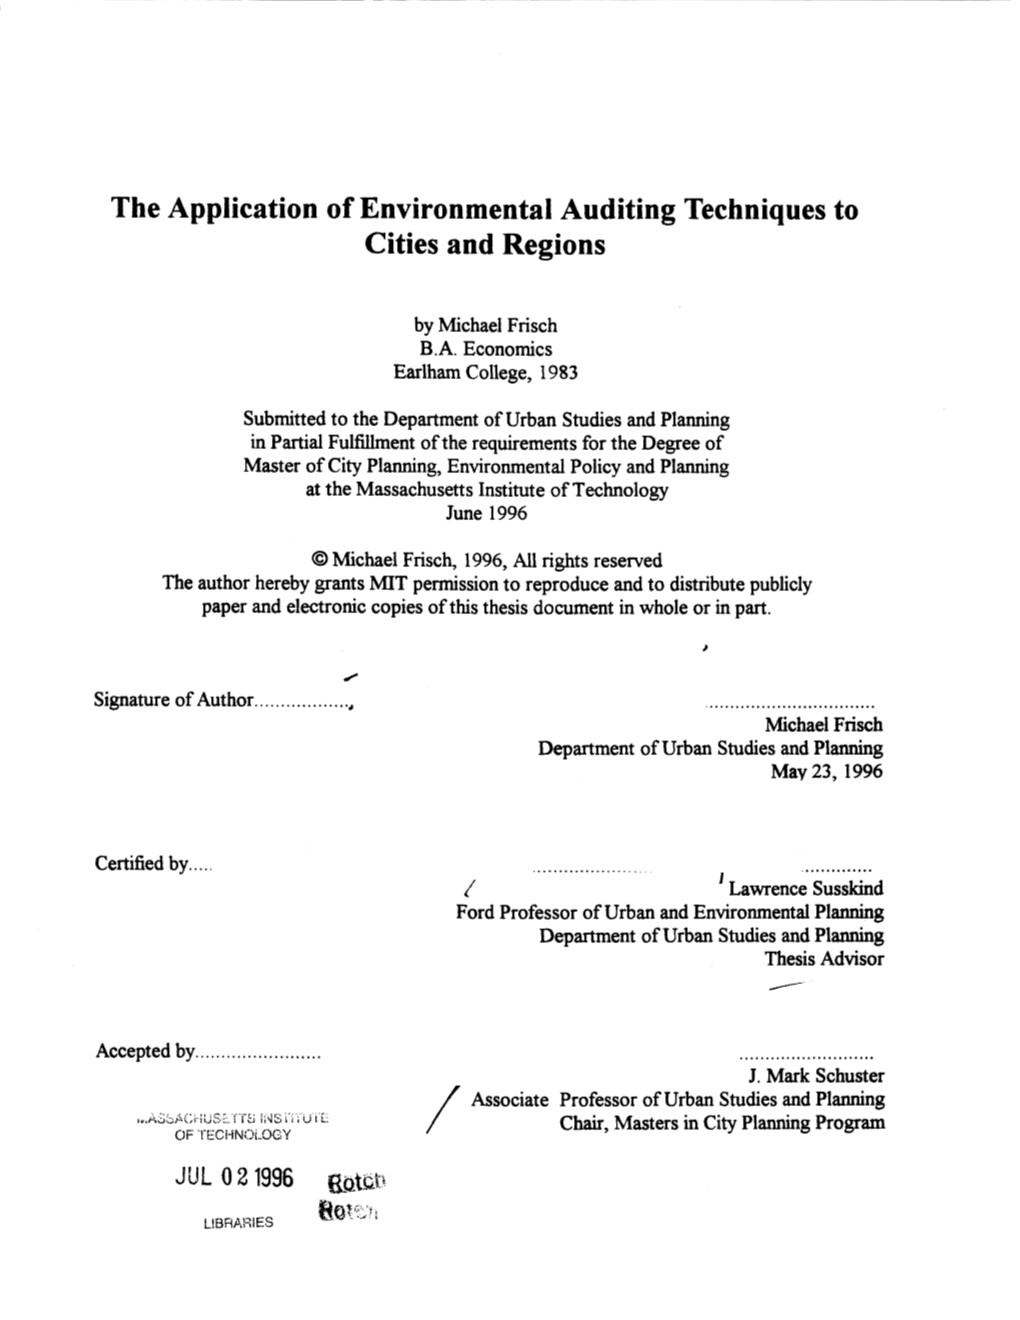 The Application of Environmental Auditing Techniques to Cities and Regions